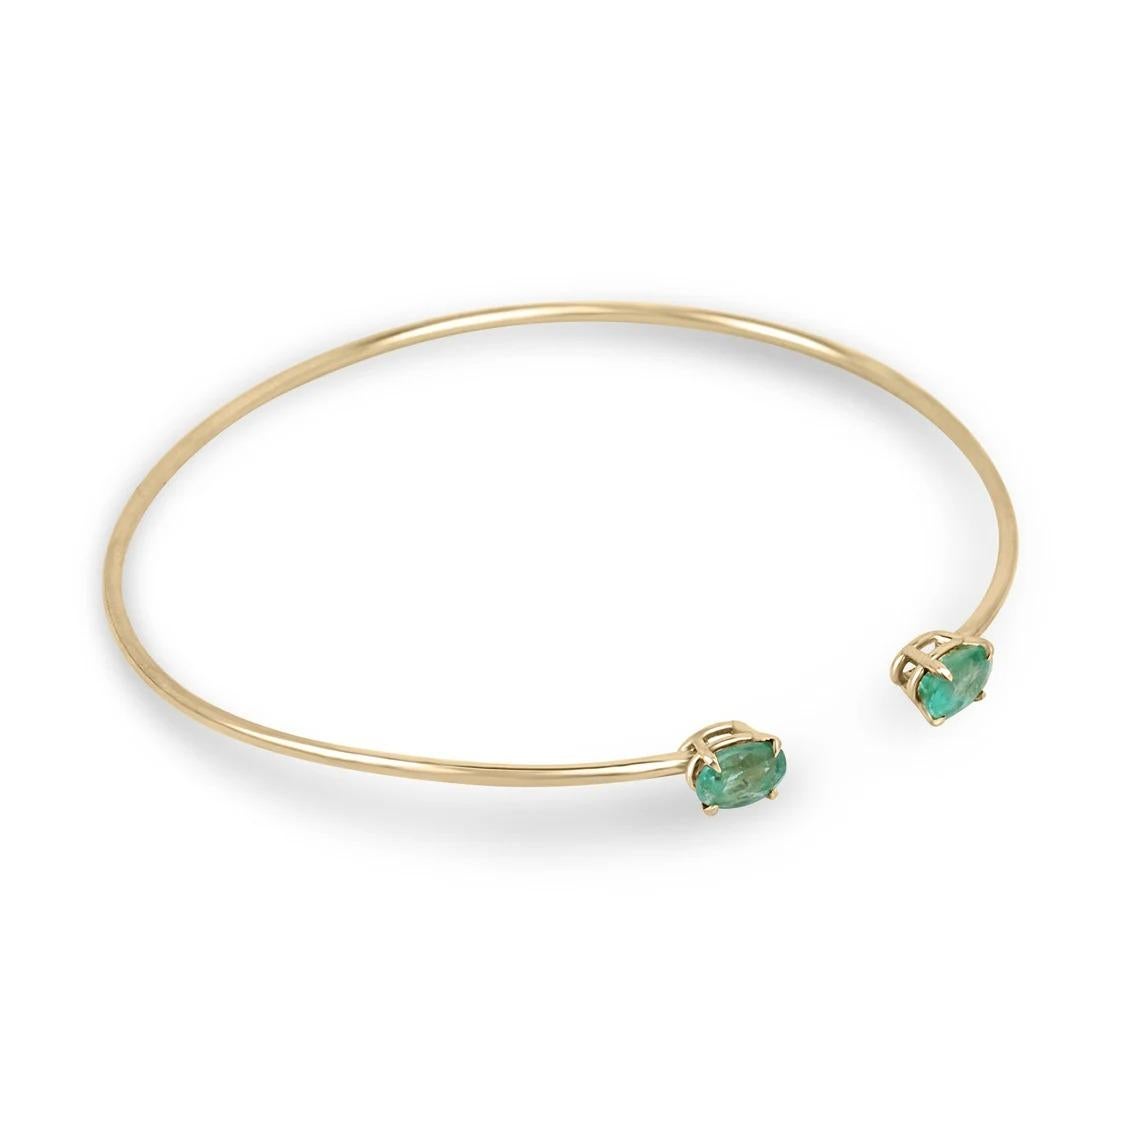 The toi et moi cuff bangle bracelet is a stunning piece of jewelry that symbolizes the intertwining of two individuals. This exquisite bracelet features two oval cut emeralds, weighing a total of 1.80 carats, set in a four claw prong setting. The